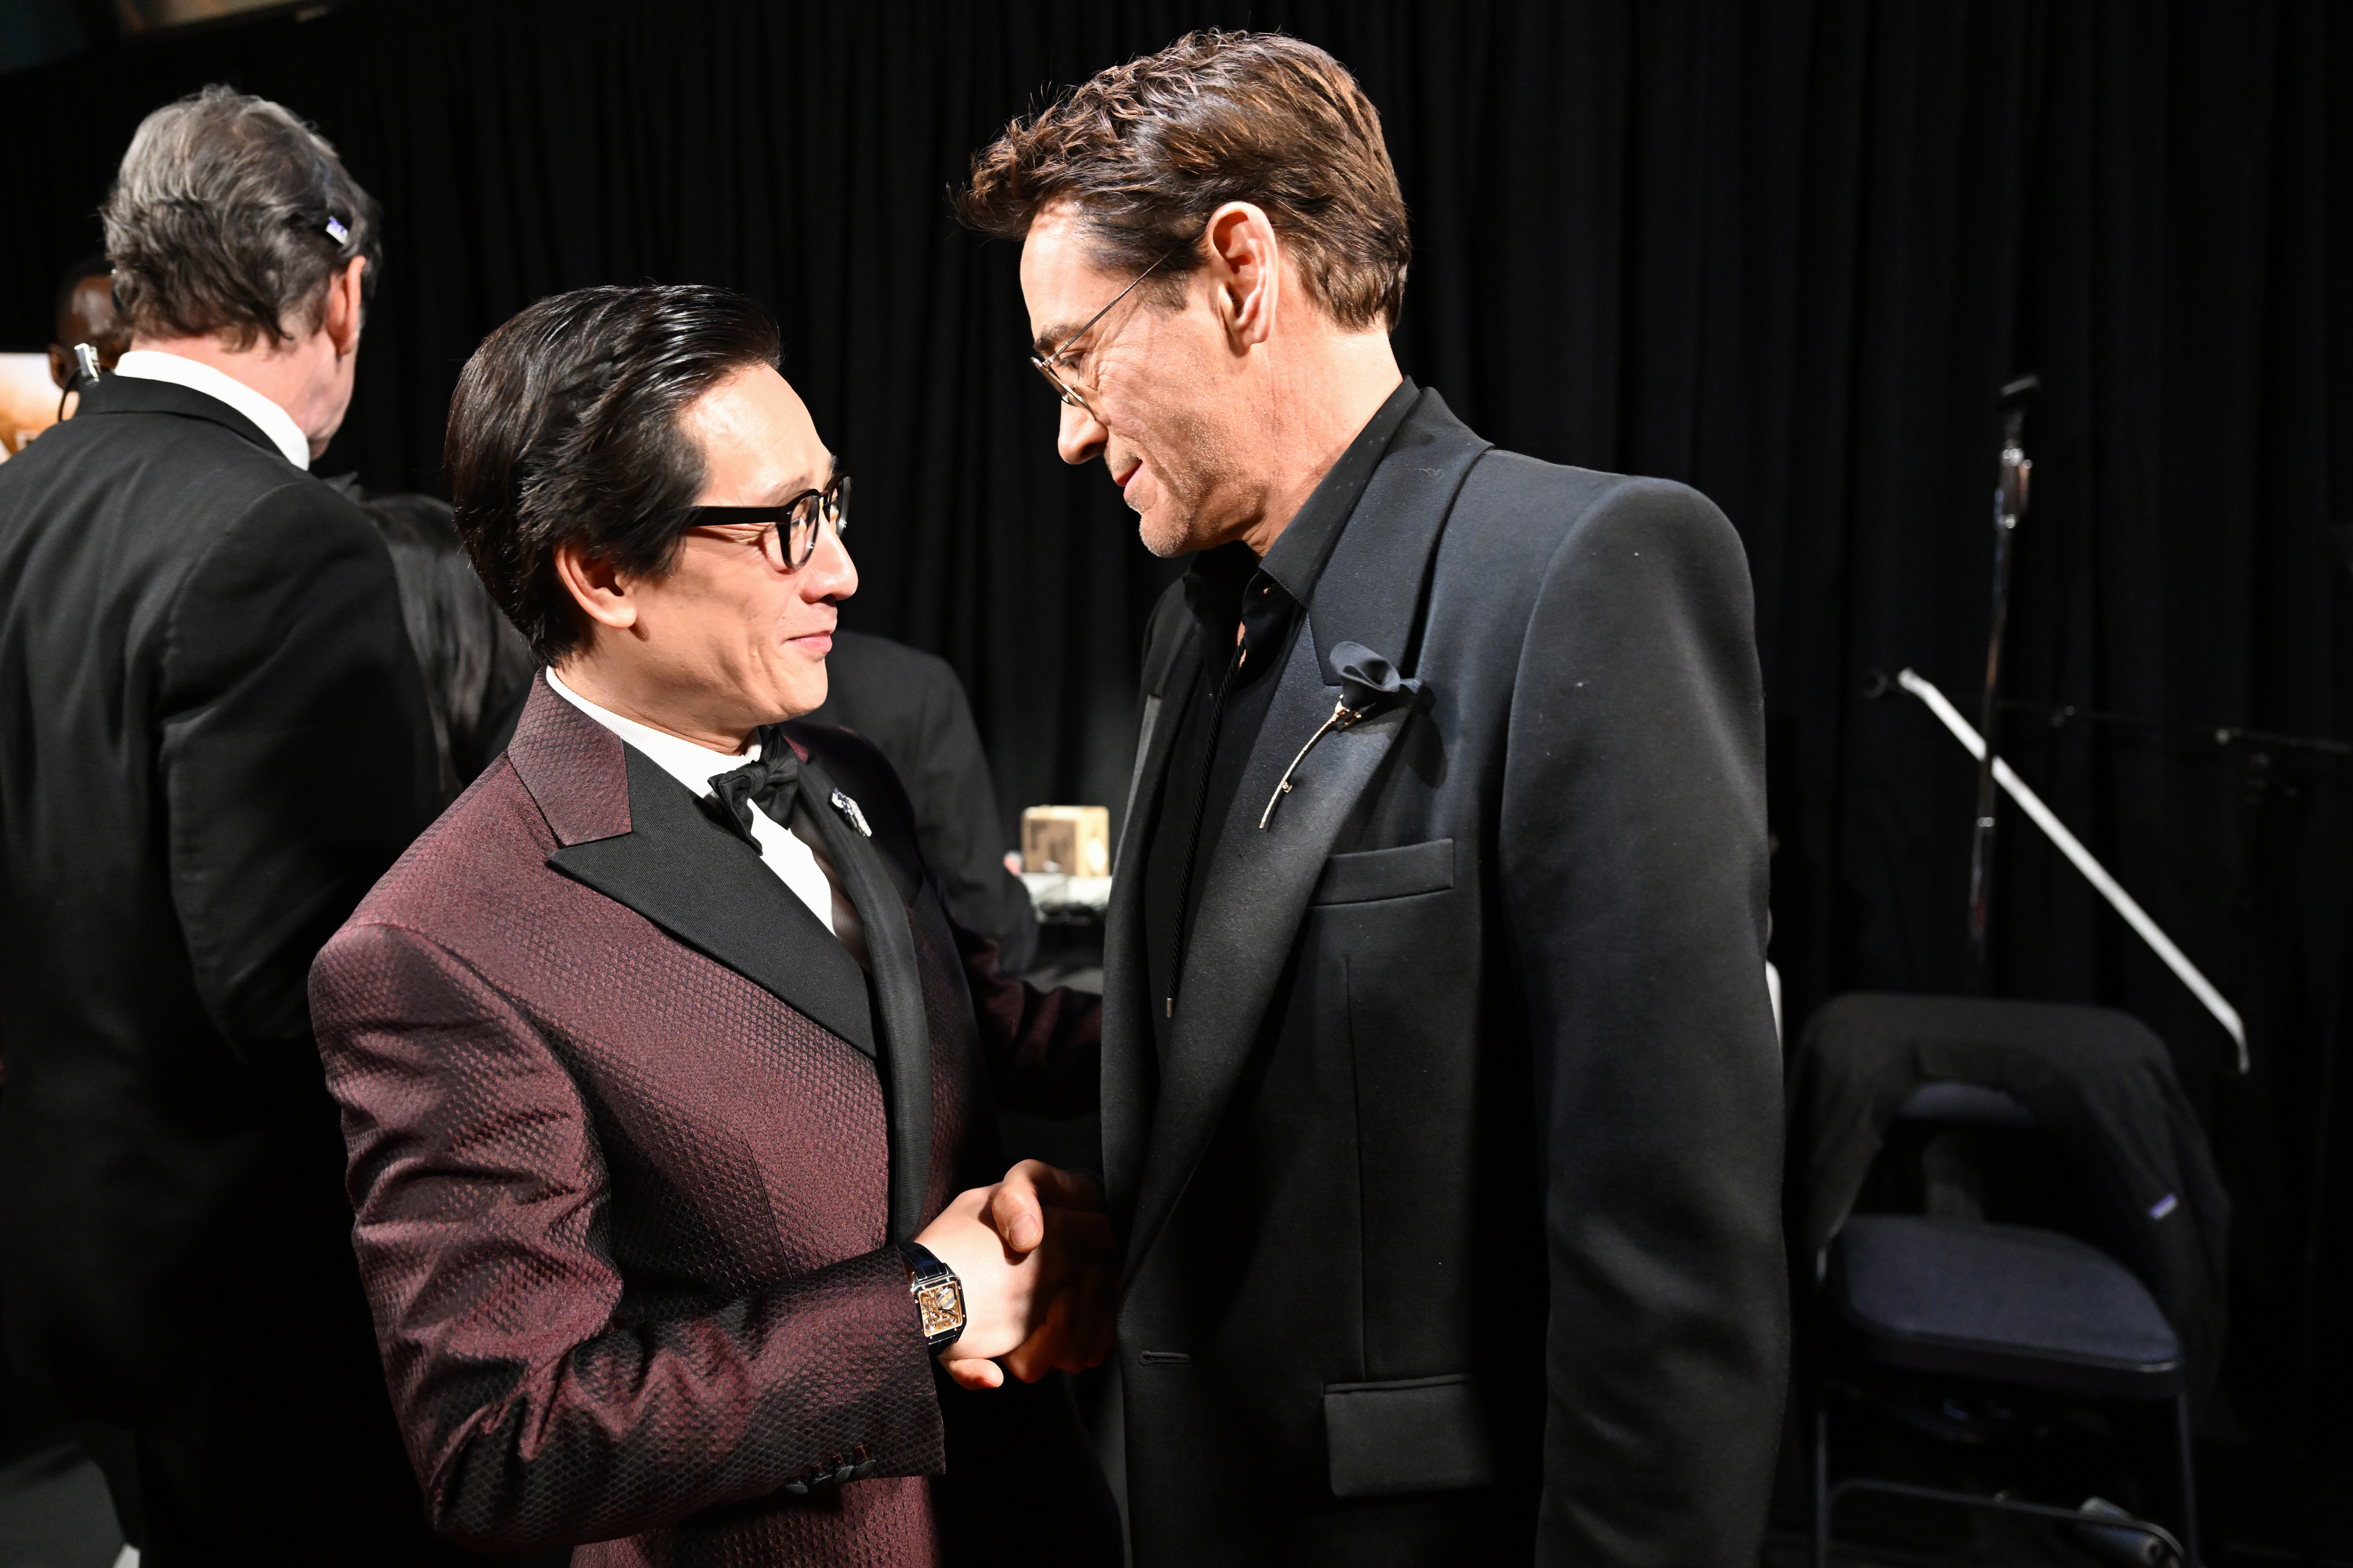 Ke Huy and RDJ in formal suits smiling and shaking hands